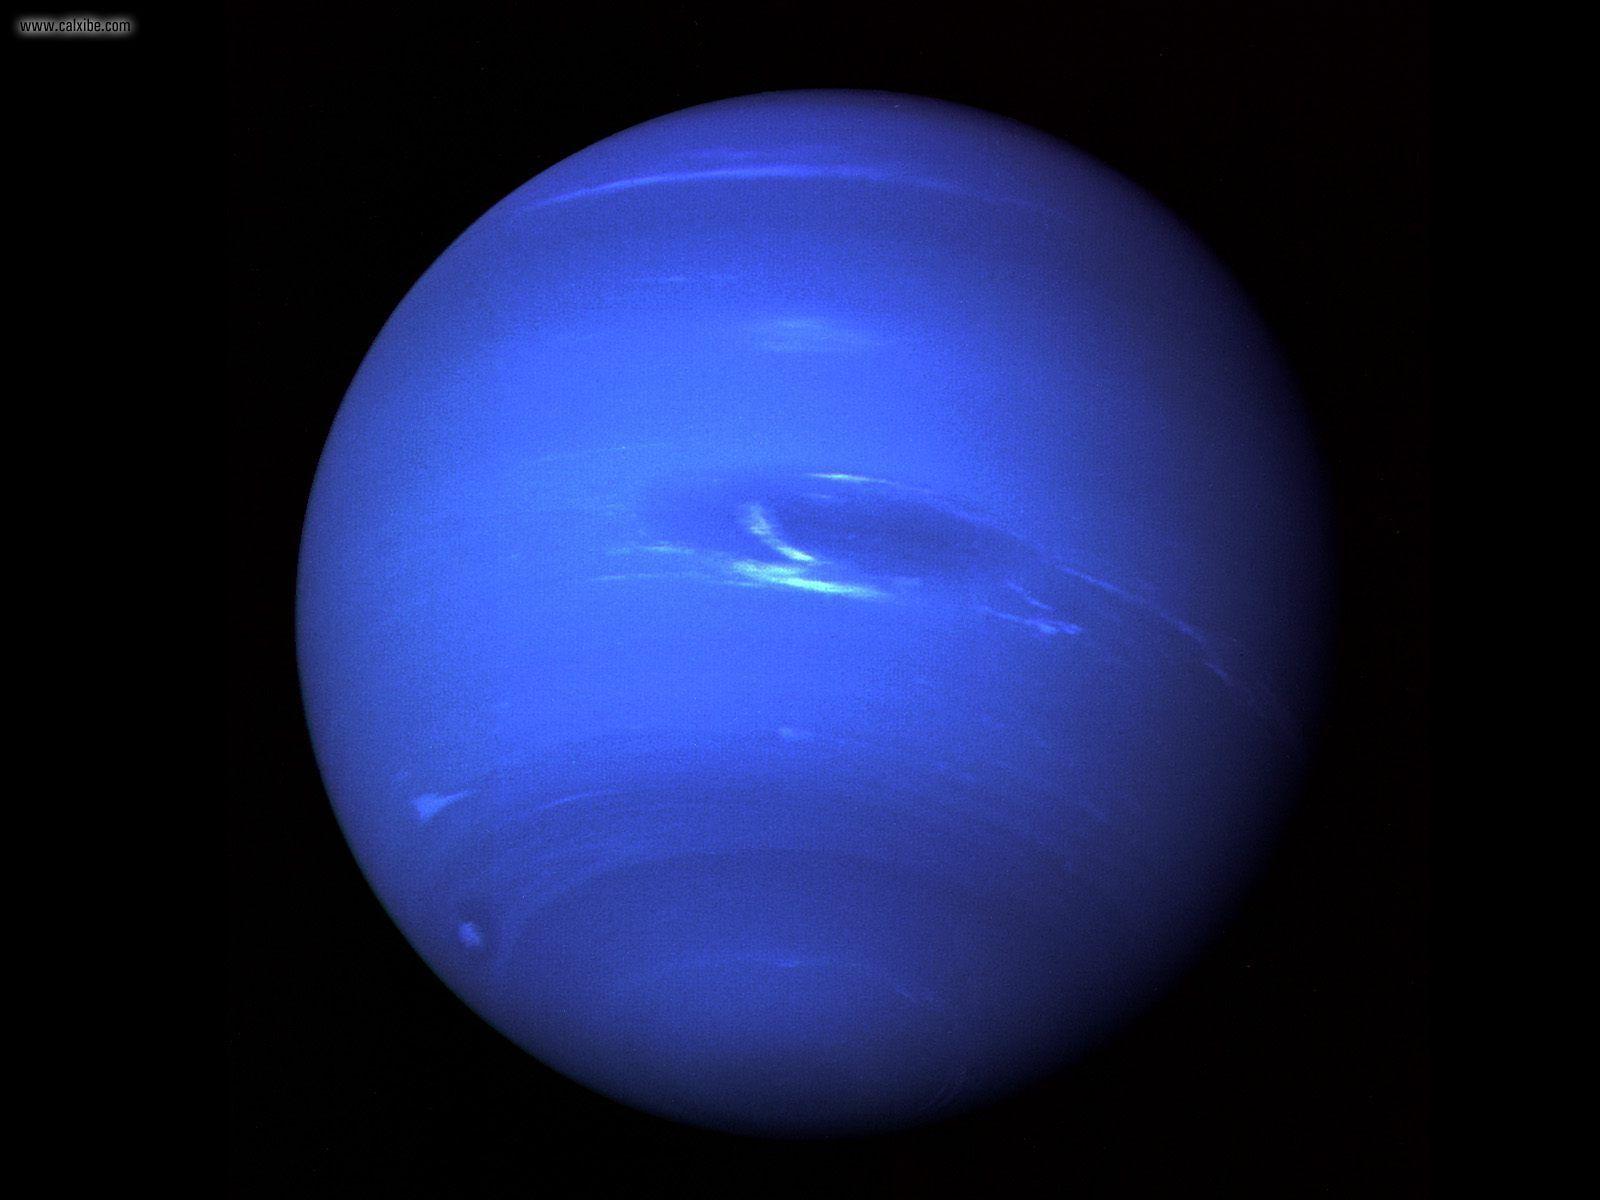 When the 8th Planet Neptune, was discovered by astronomers